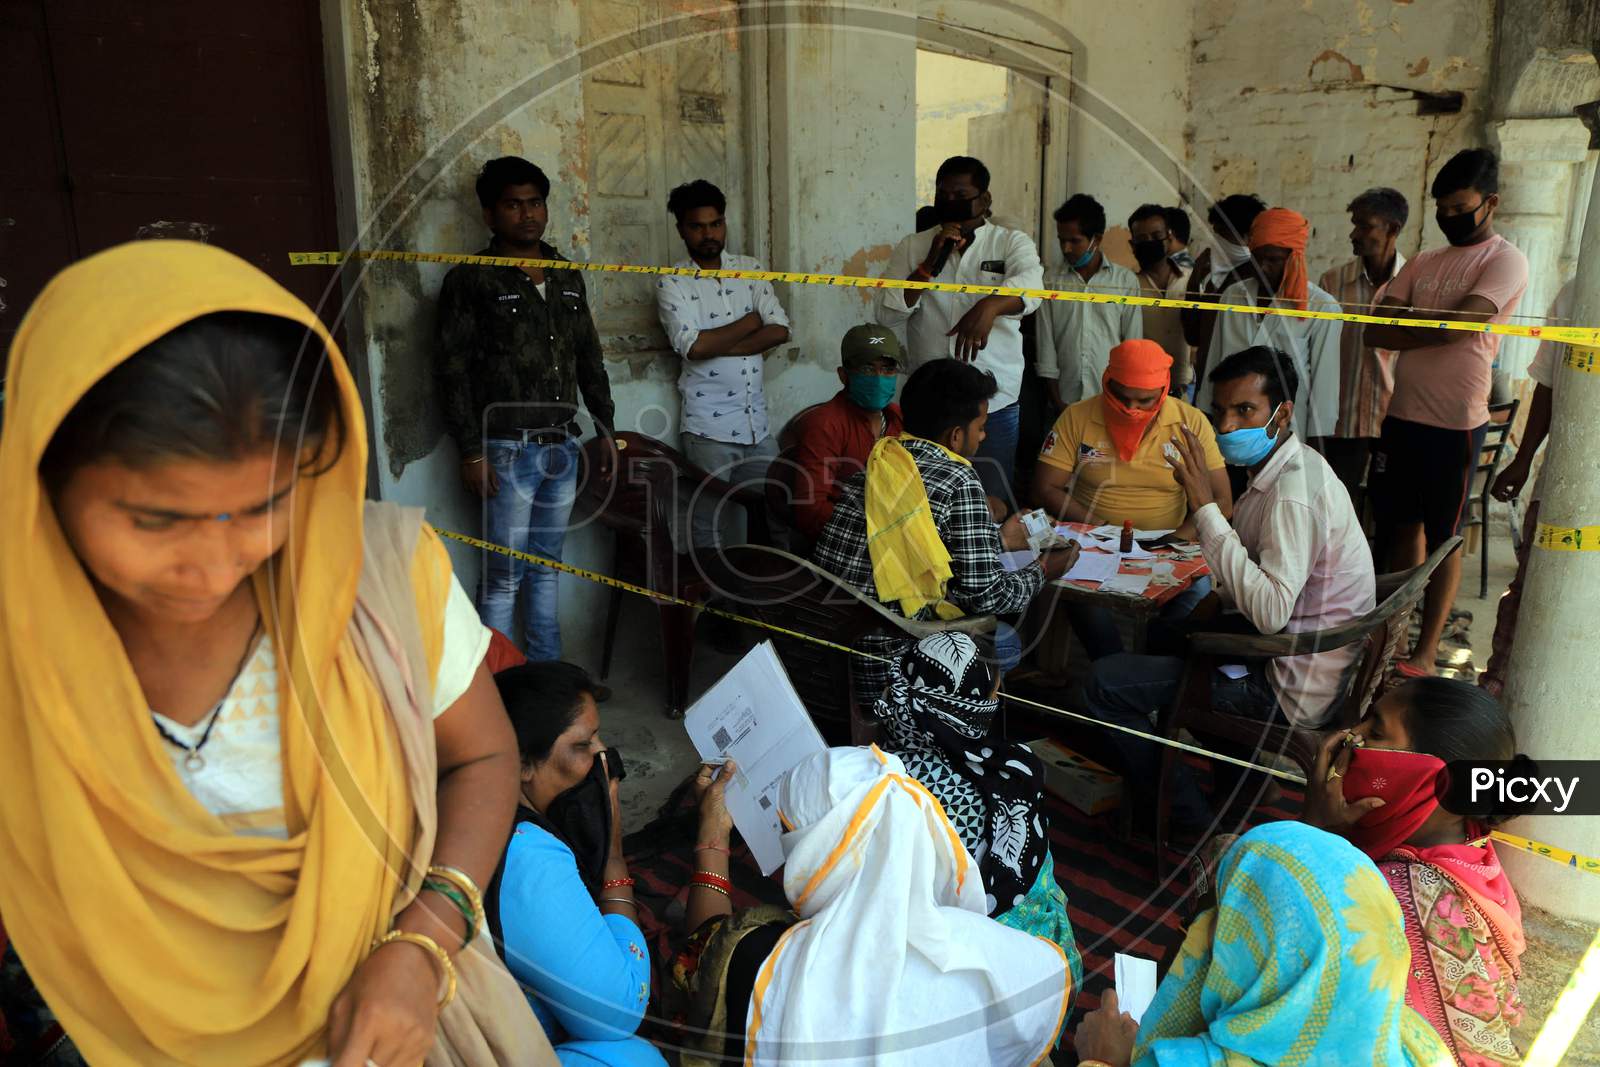 Women Waiting For Ration At A Government Ration Shop During Nationwide Lockdown In Wake Of Coronavirus Or COVID-19 Pandemic In Prayagraj, March 12, 2020.